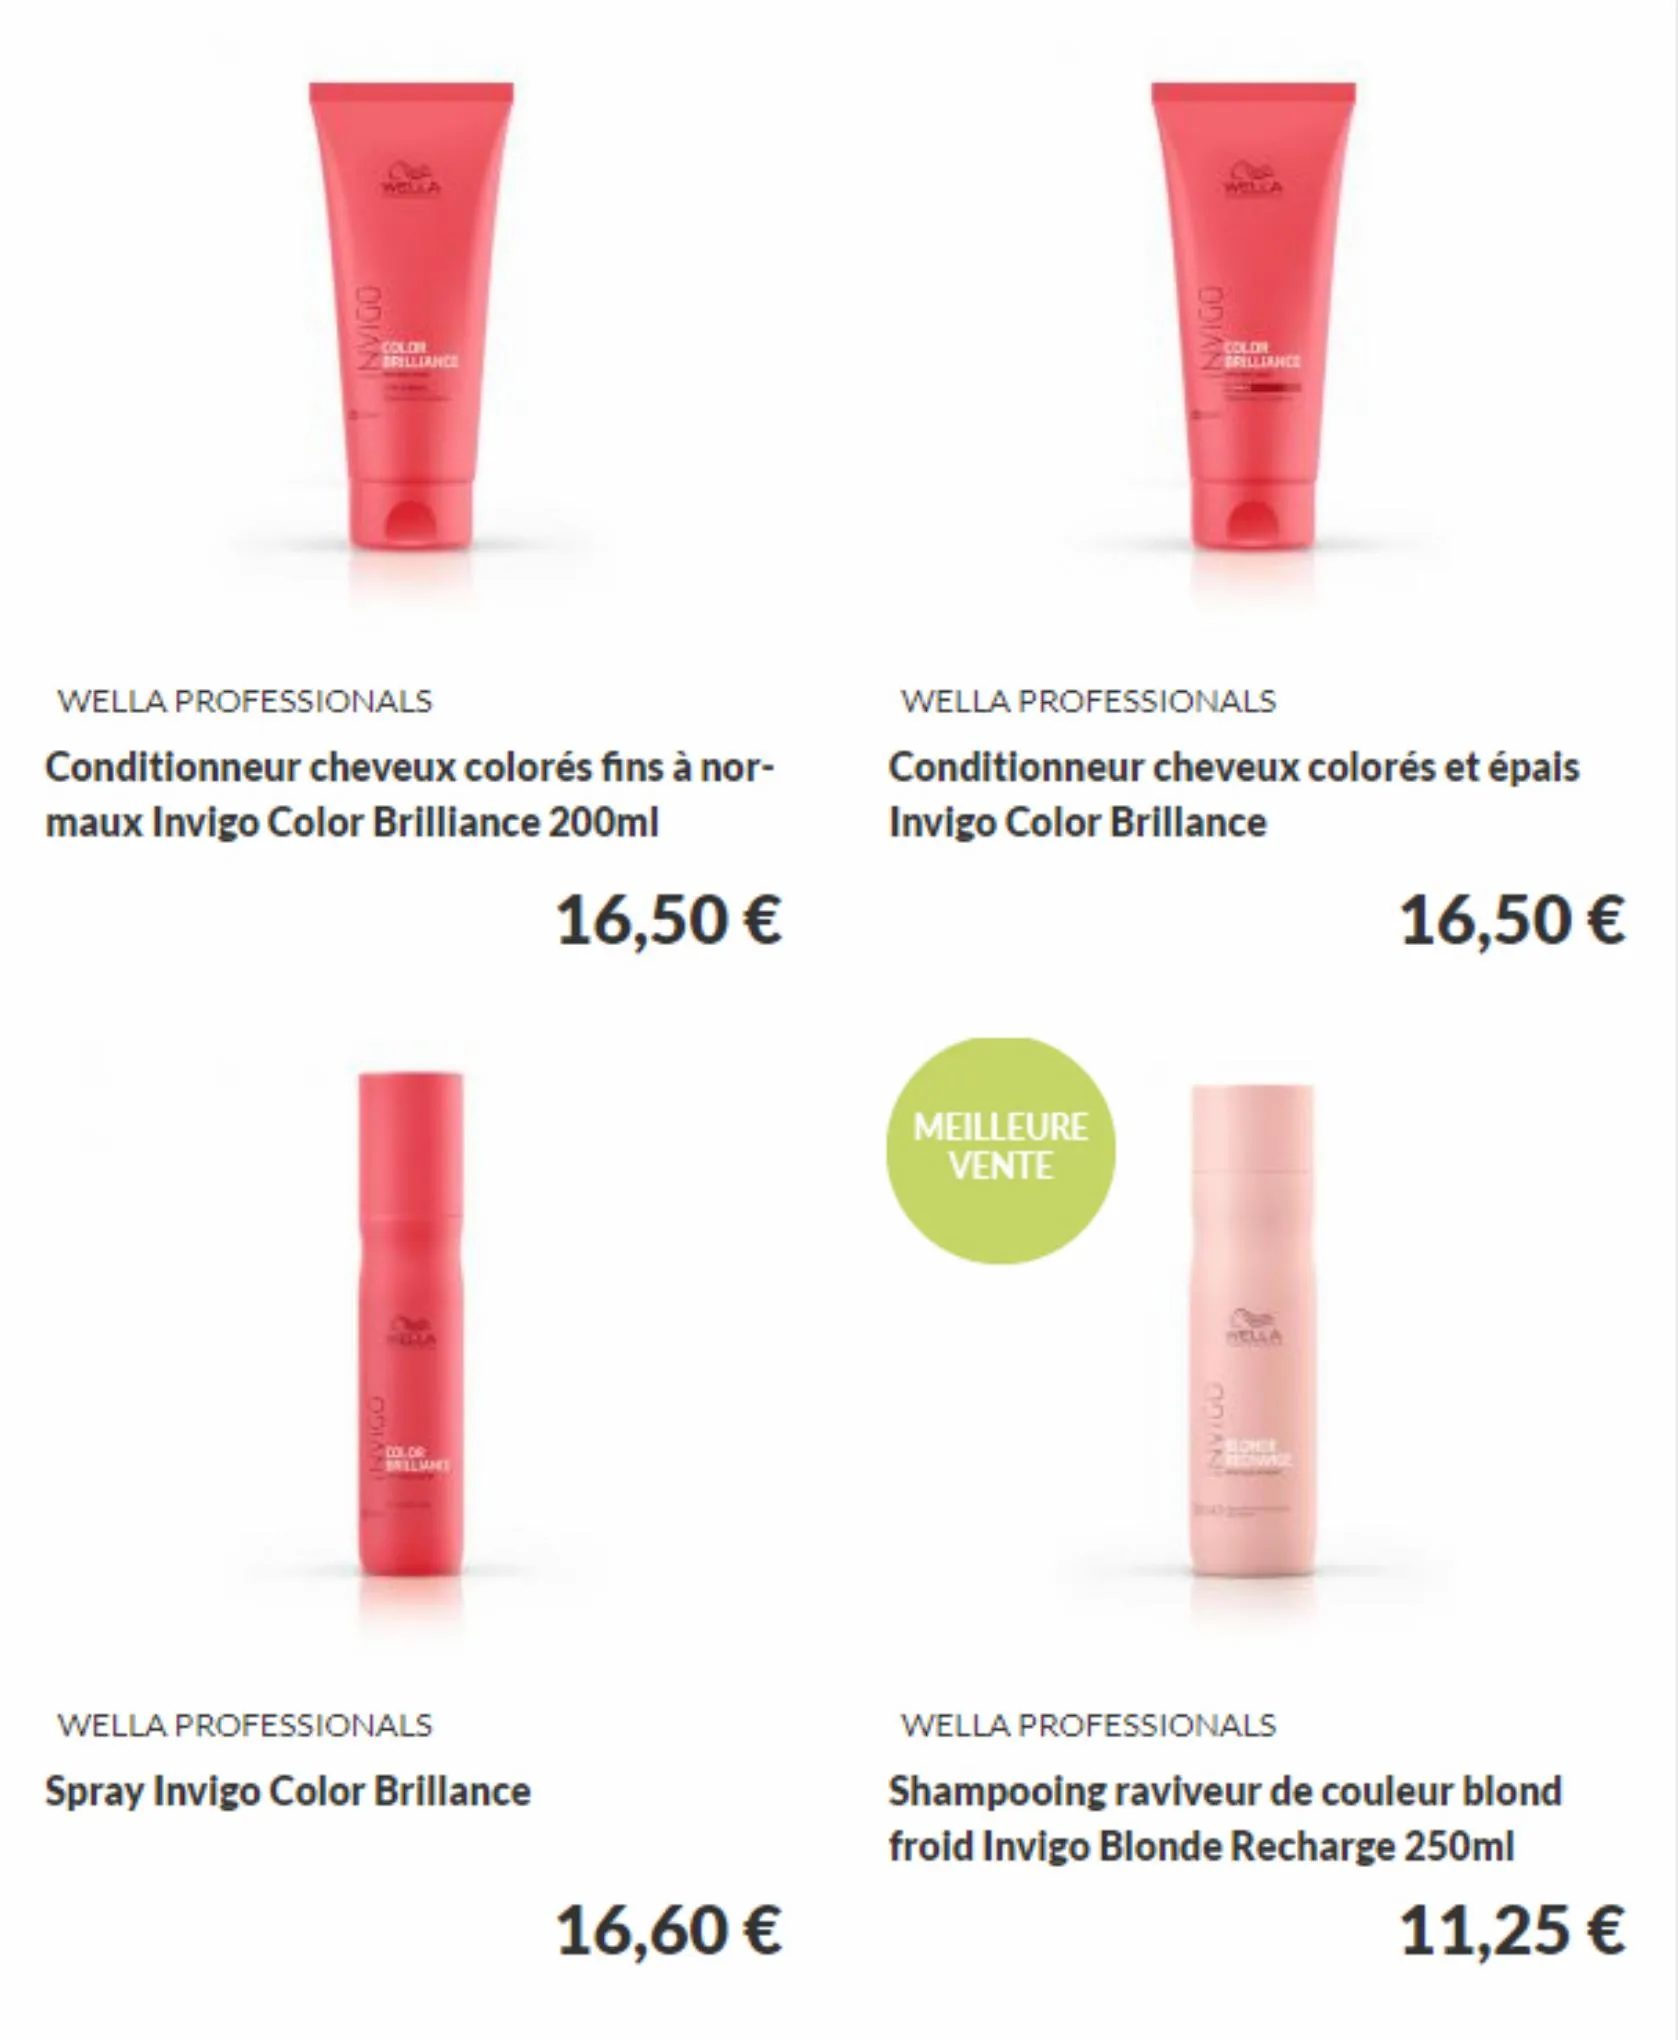 Catalogue OFFRE ROUTINE COULEUR SOIN COIFFAGE WELLA!, page 00005